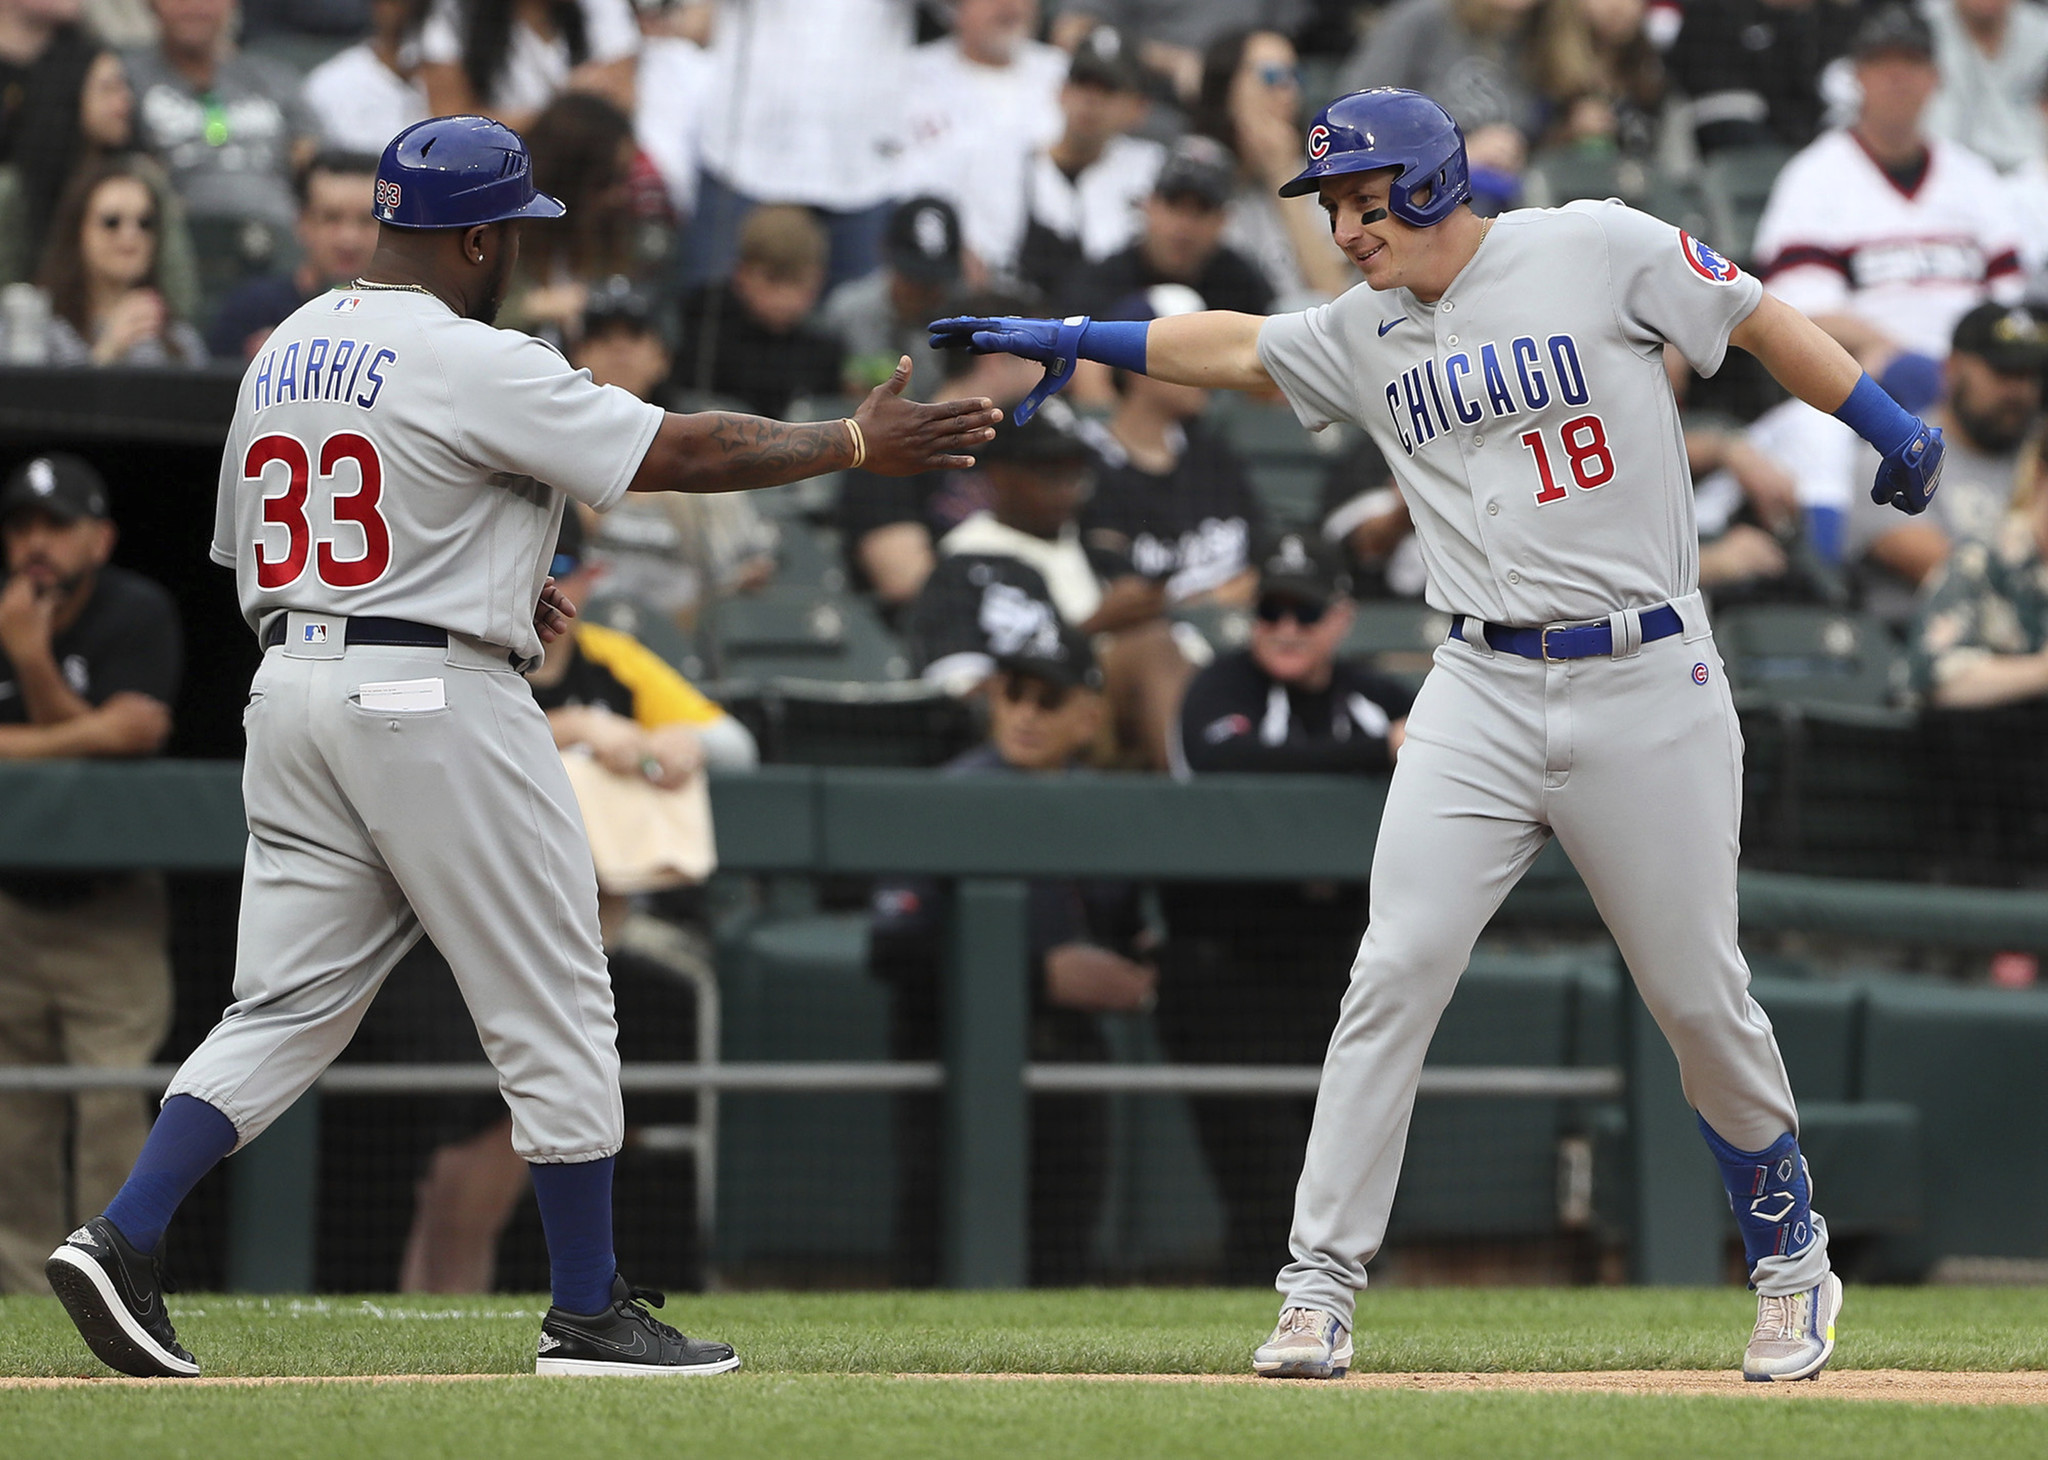 As trade winds blow, Cubs rally for wild 10-7 win over White Sox